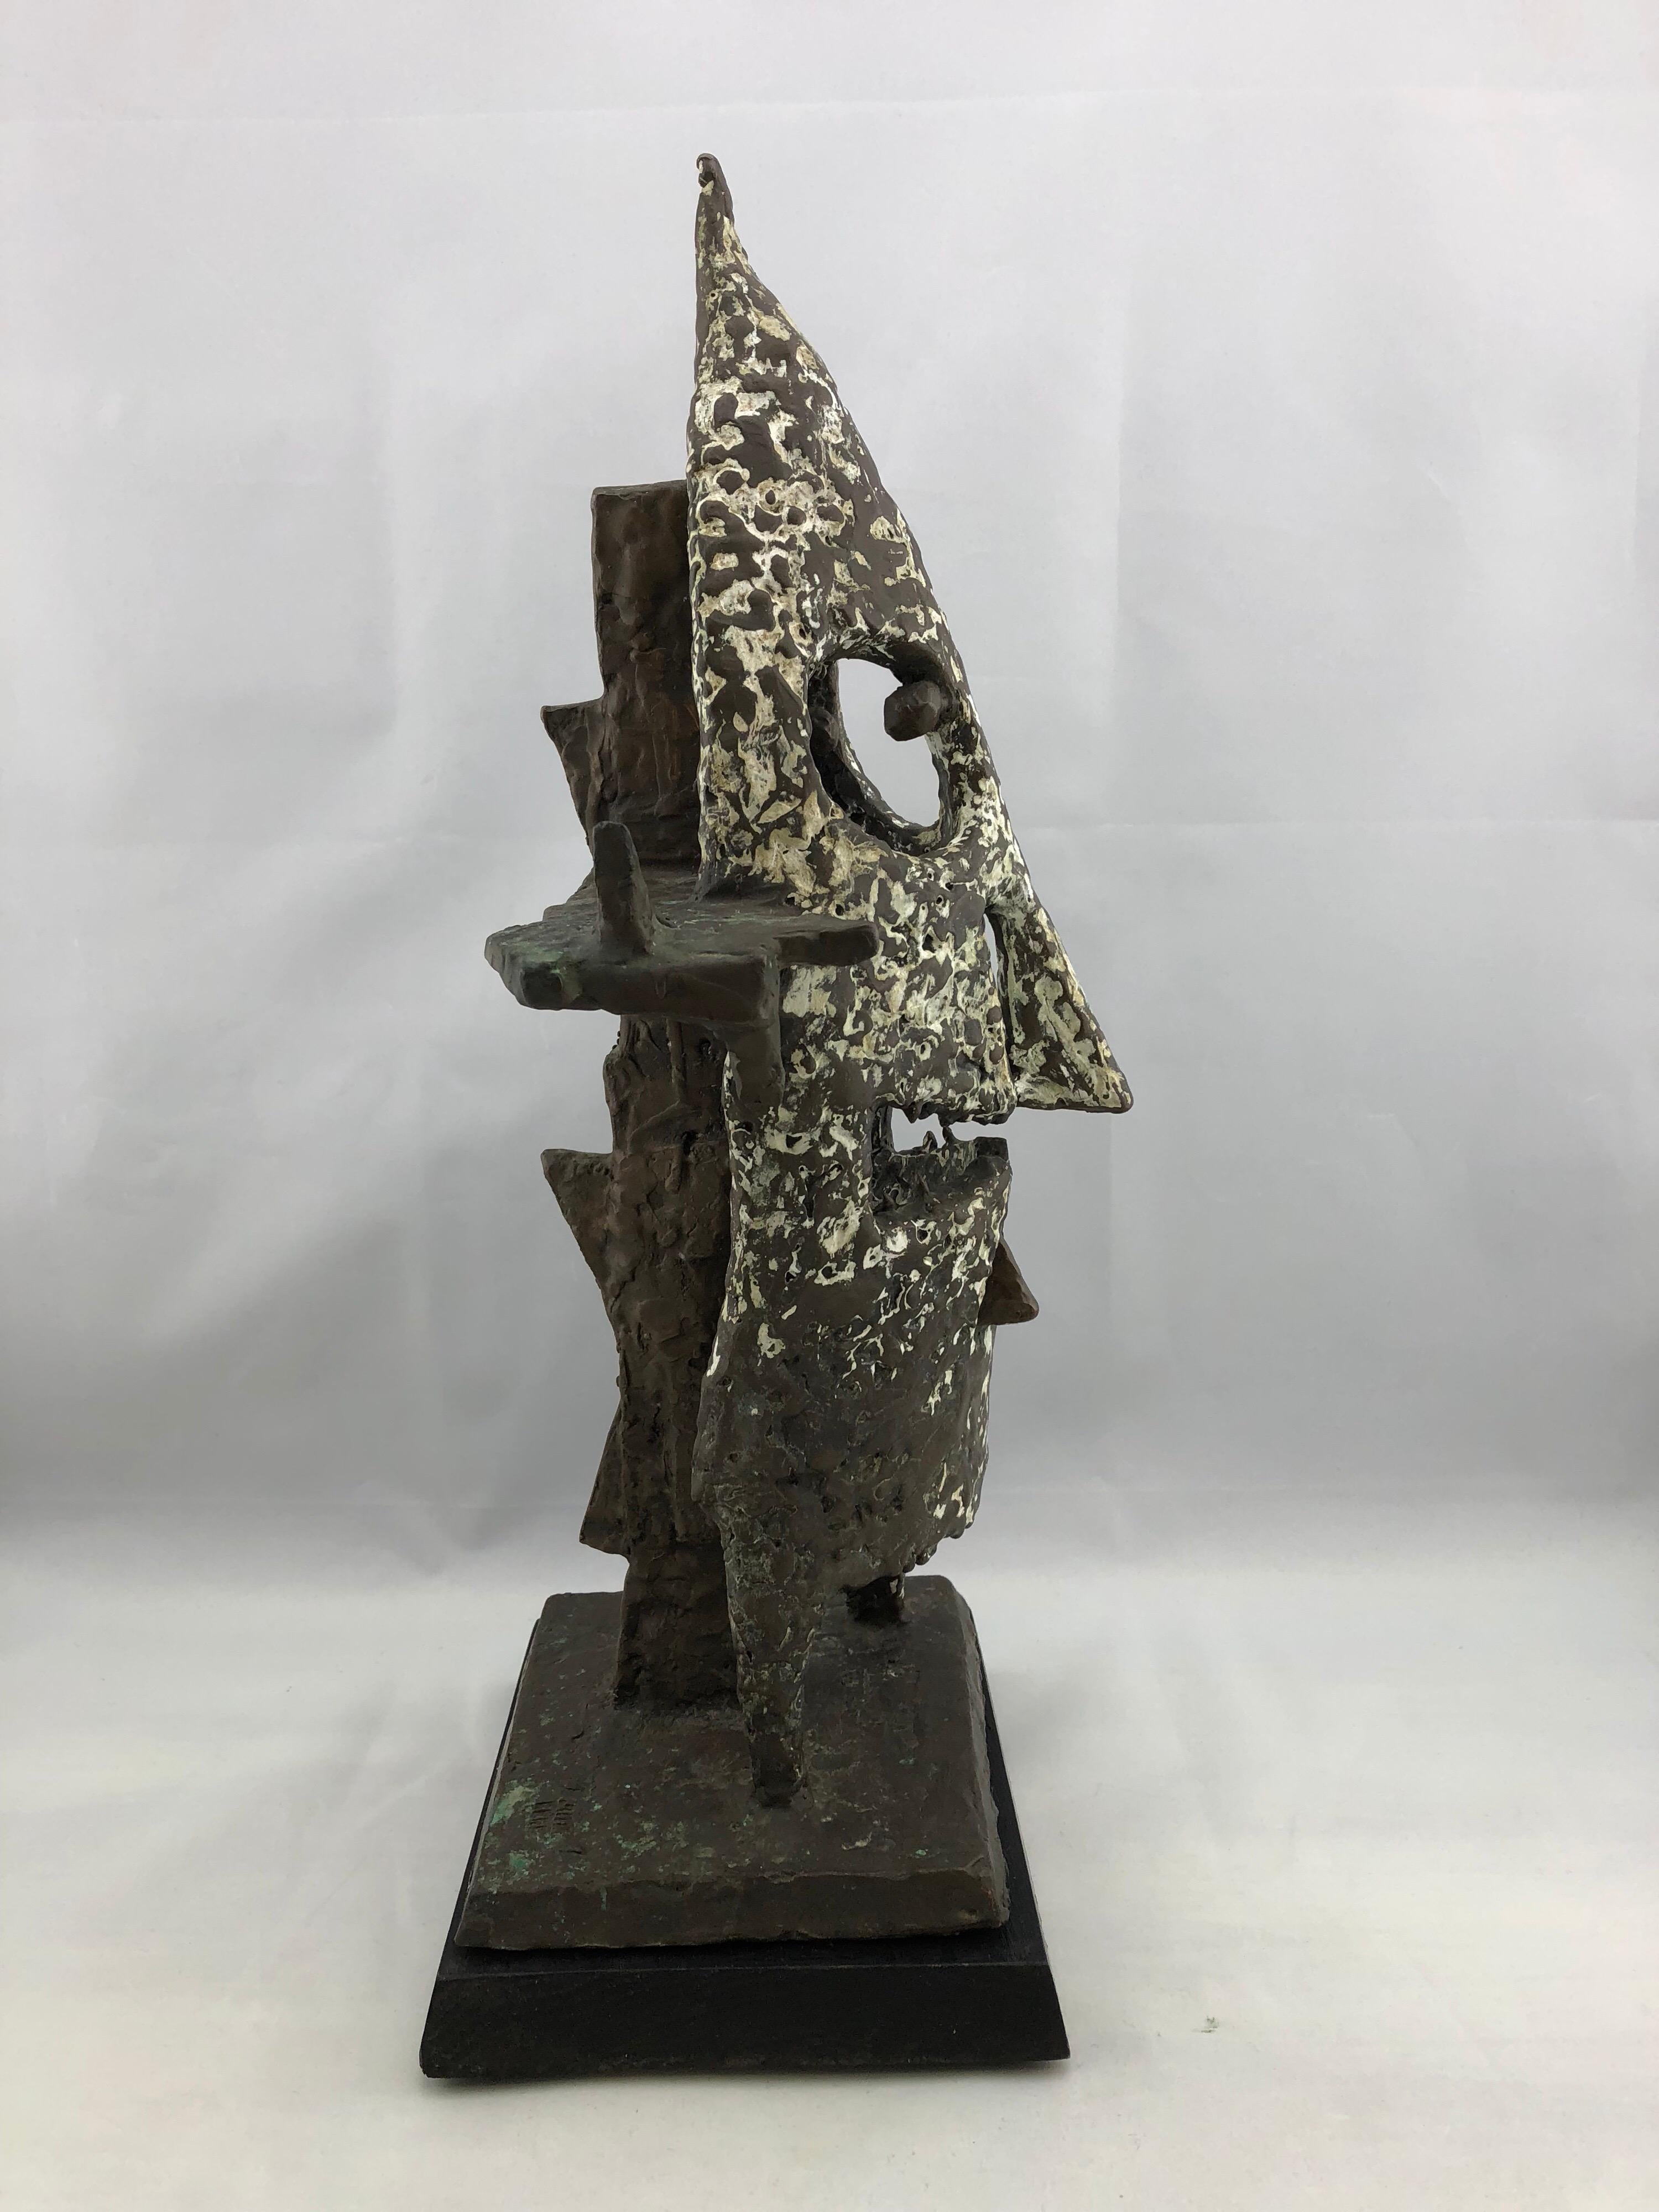 1960s bronze sculpture by John Alfred Begg. Rare to market item by John Begg. This is from a 1 owner collection of John Begg sculptures.